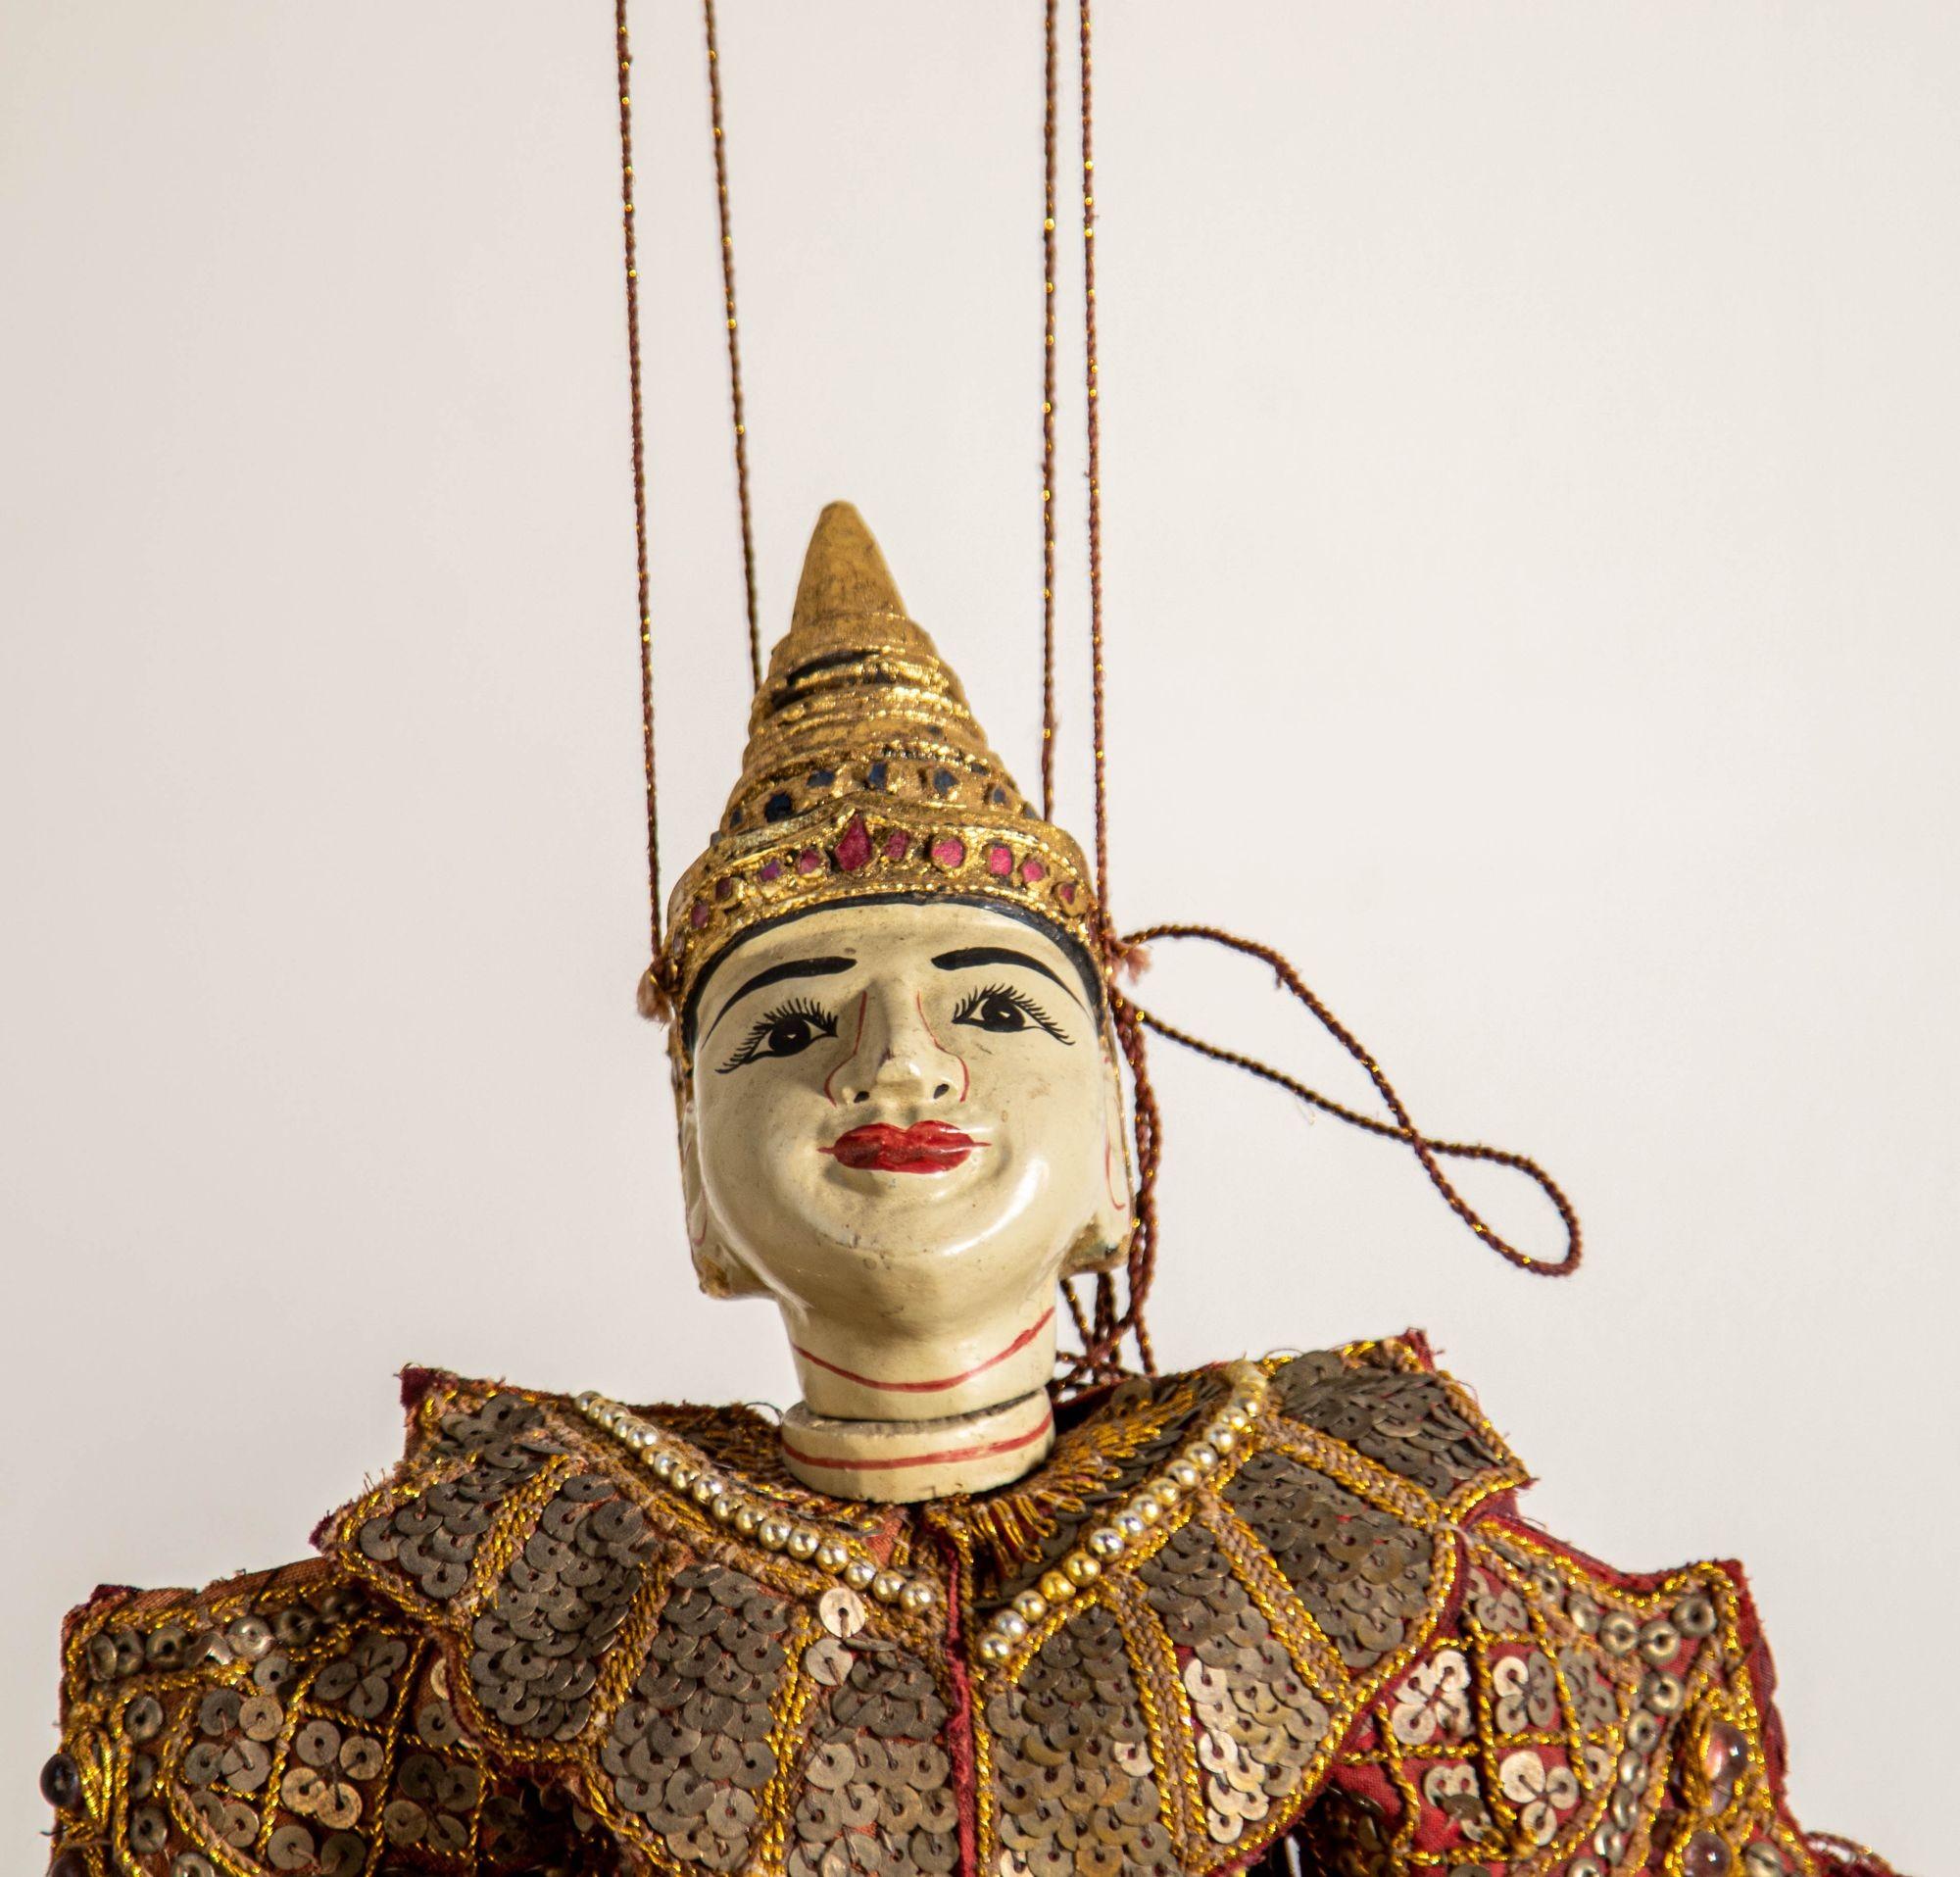 Exquisite Vintage 1950s Handcrafted Wooden Marionette with Burmese String, Reflecting Asian Opera Artistry.
This splendid Burmese-Thai marionette is a testament to masterful hand carving and intricate hand painting. 
Adorned with ornate fabrics in